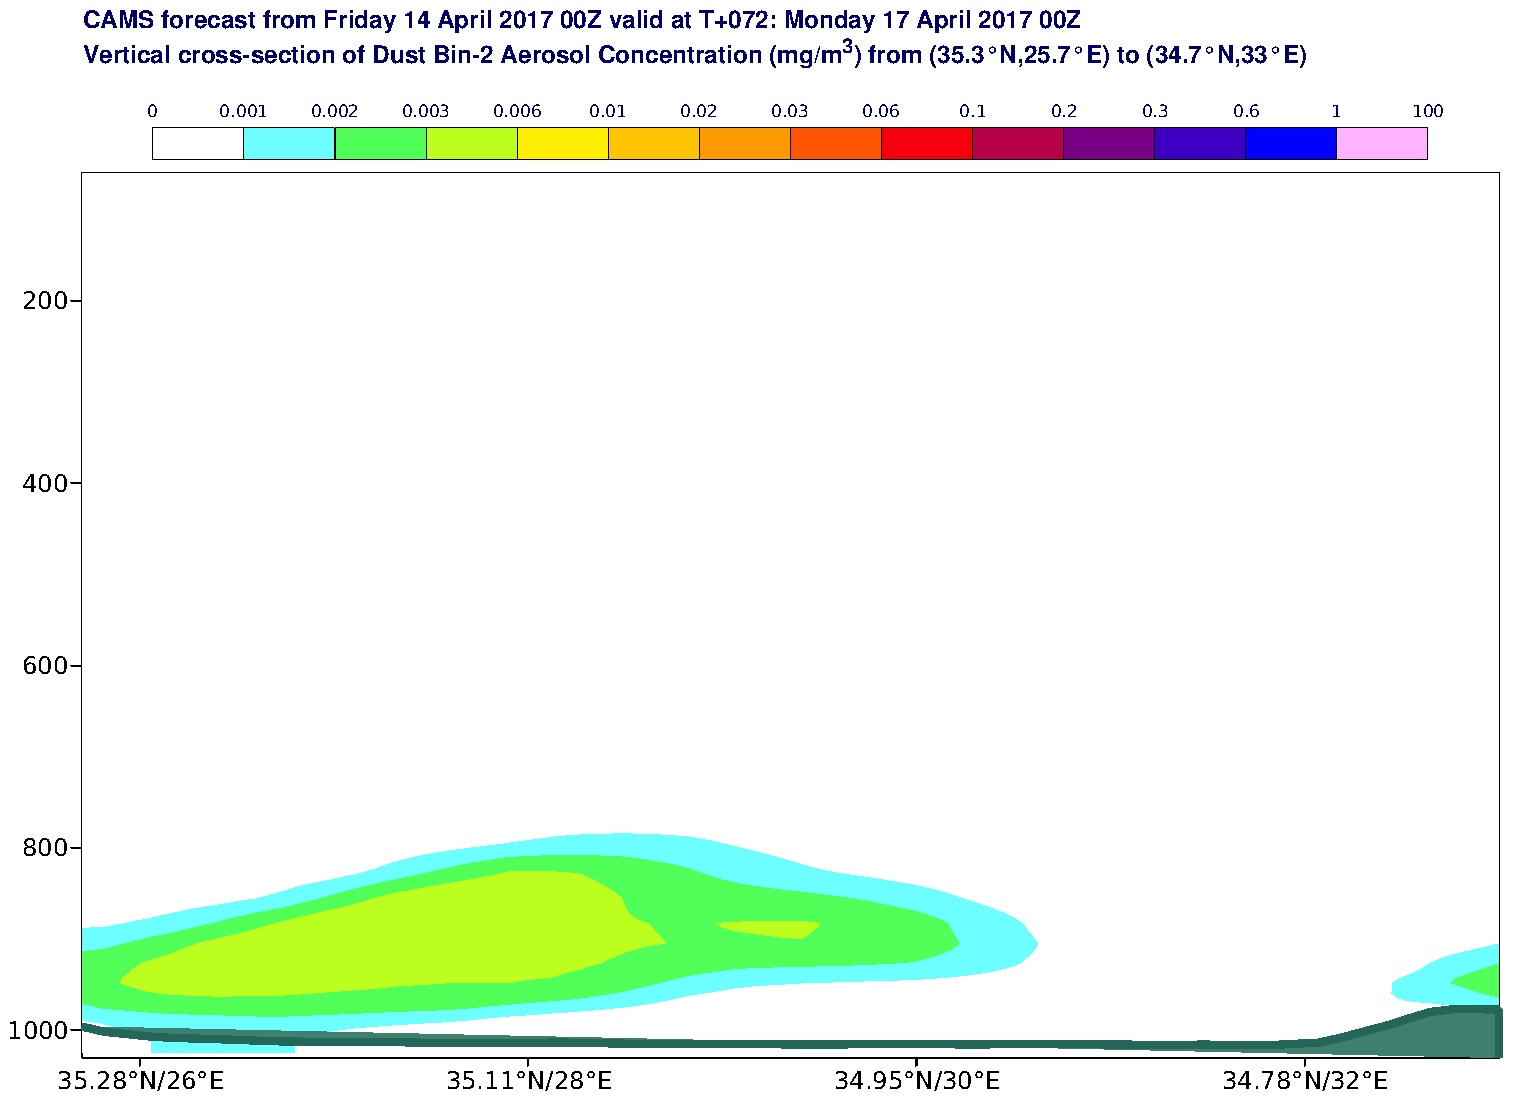 Vertical cross-section of Dust Bin-2 Aerosol Concentration (mg/m3) valid at T72 - 2017-04-17 00:00